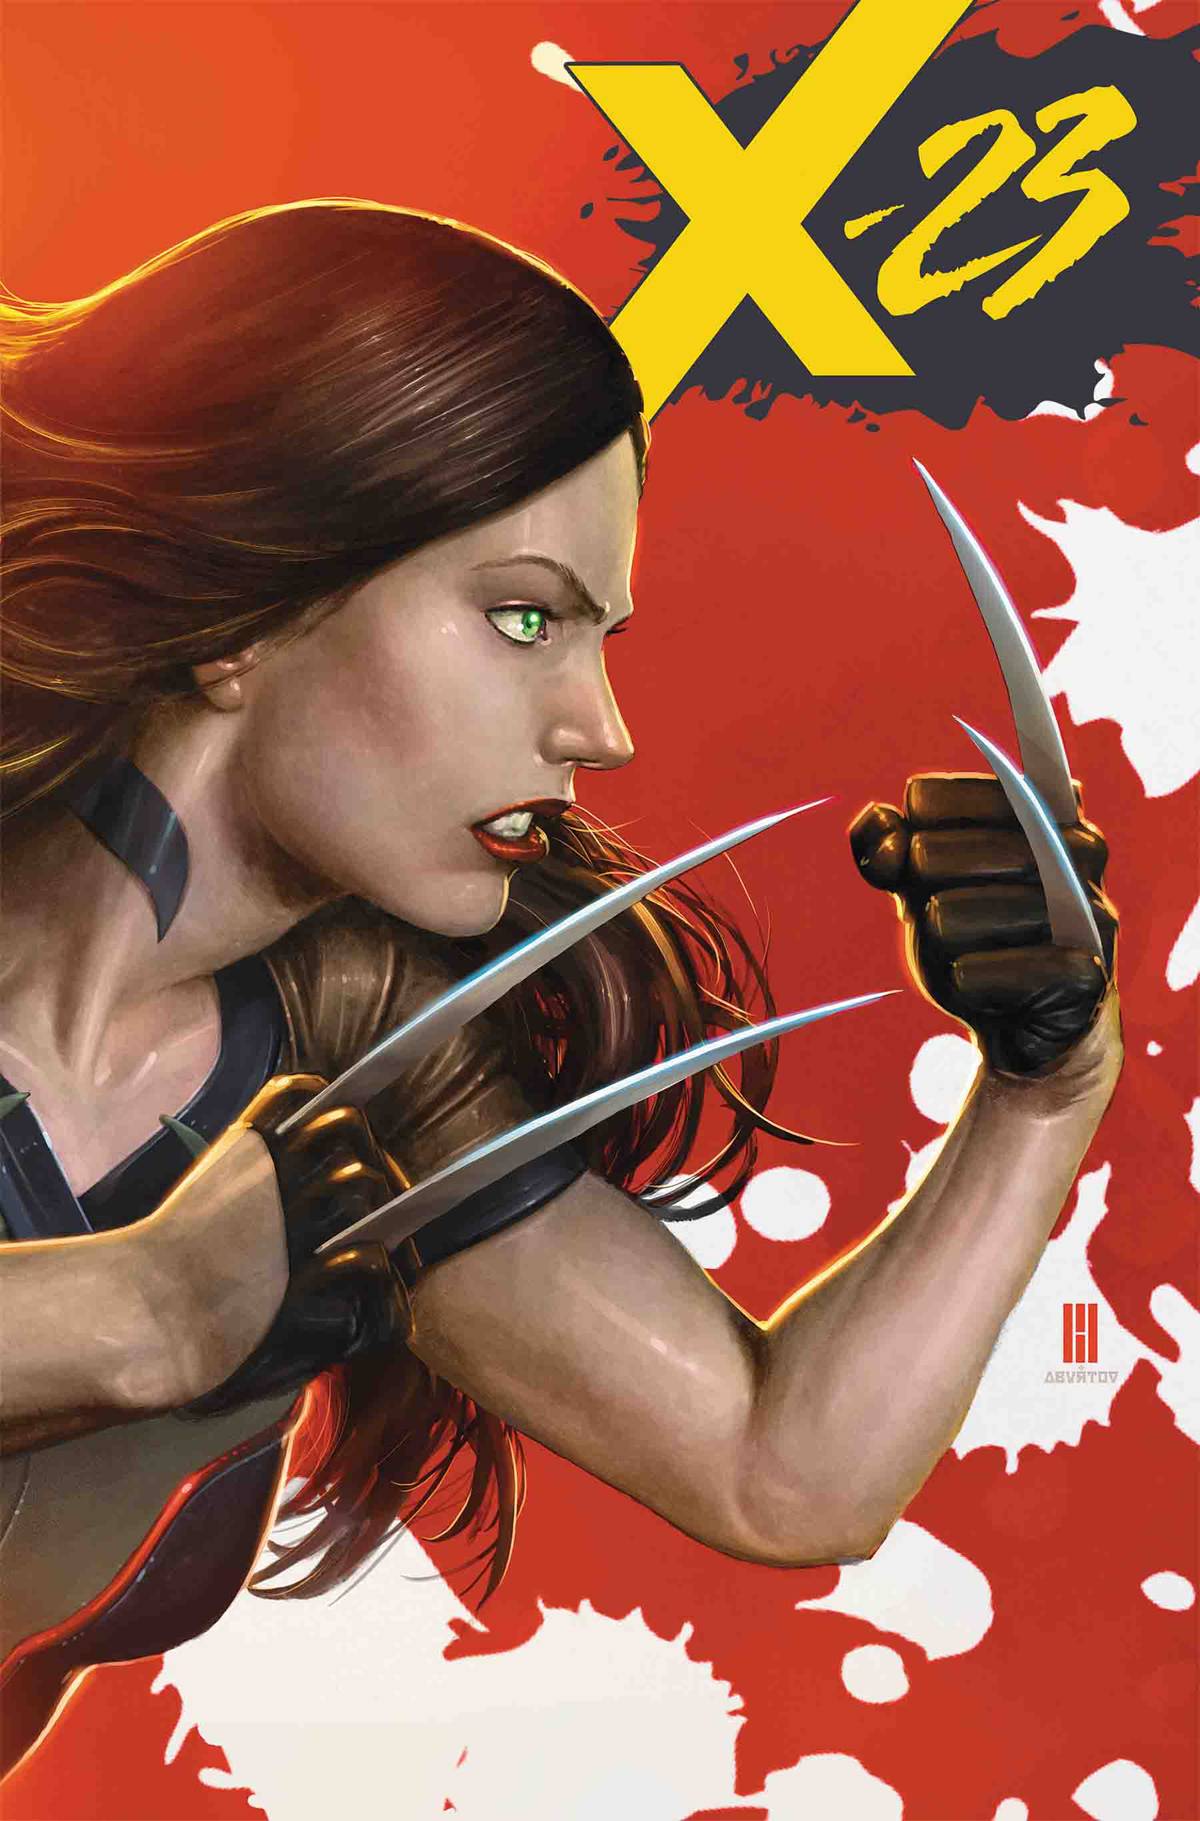 X-23 #1 BY CHOI POSTER